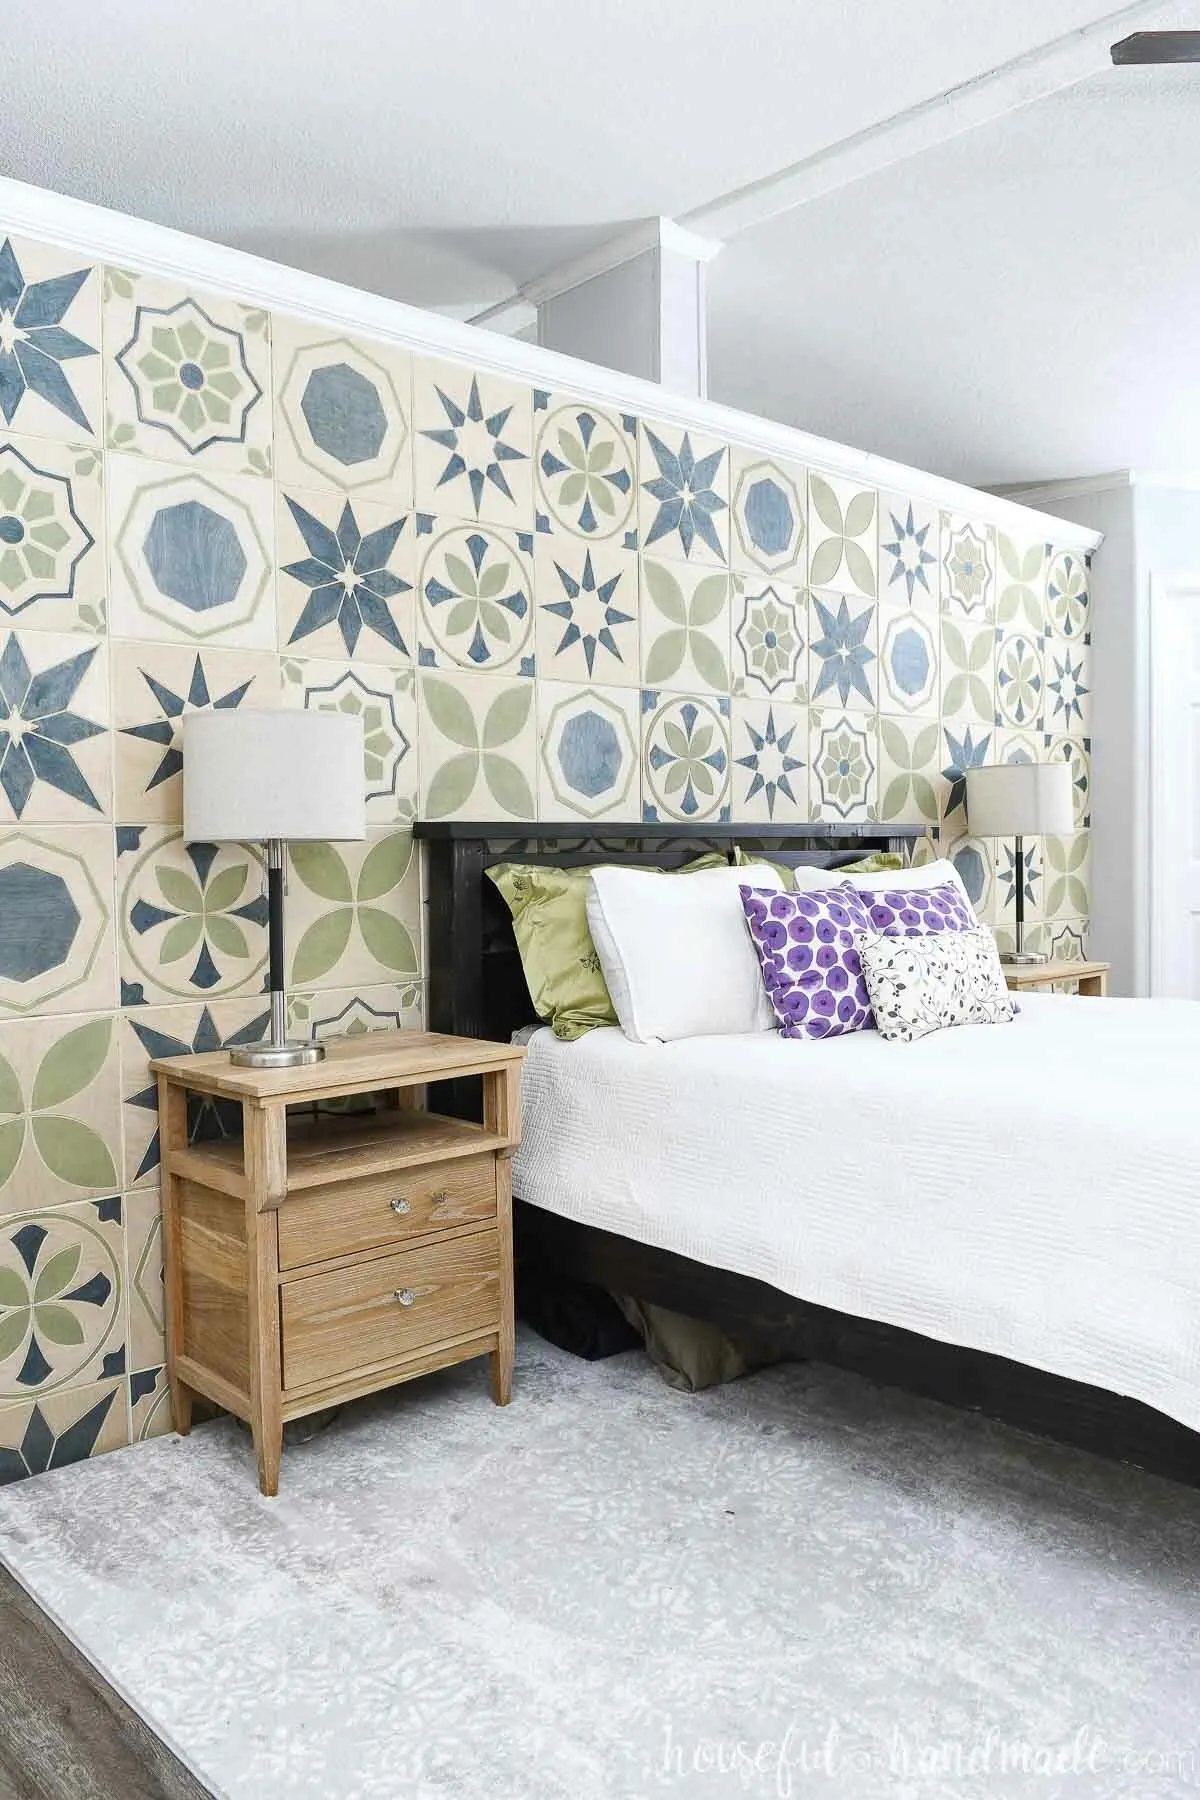 Master bedroom with a DIY accent wall made of patterned wood tiles on the wall behind the bed. 